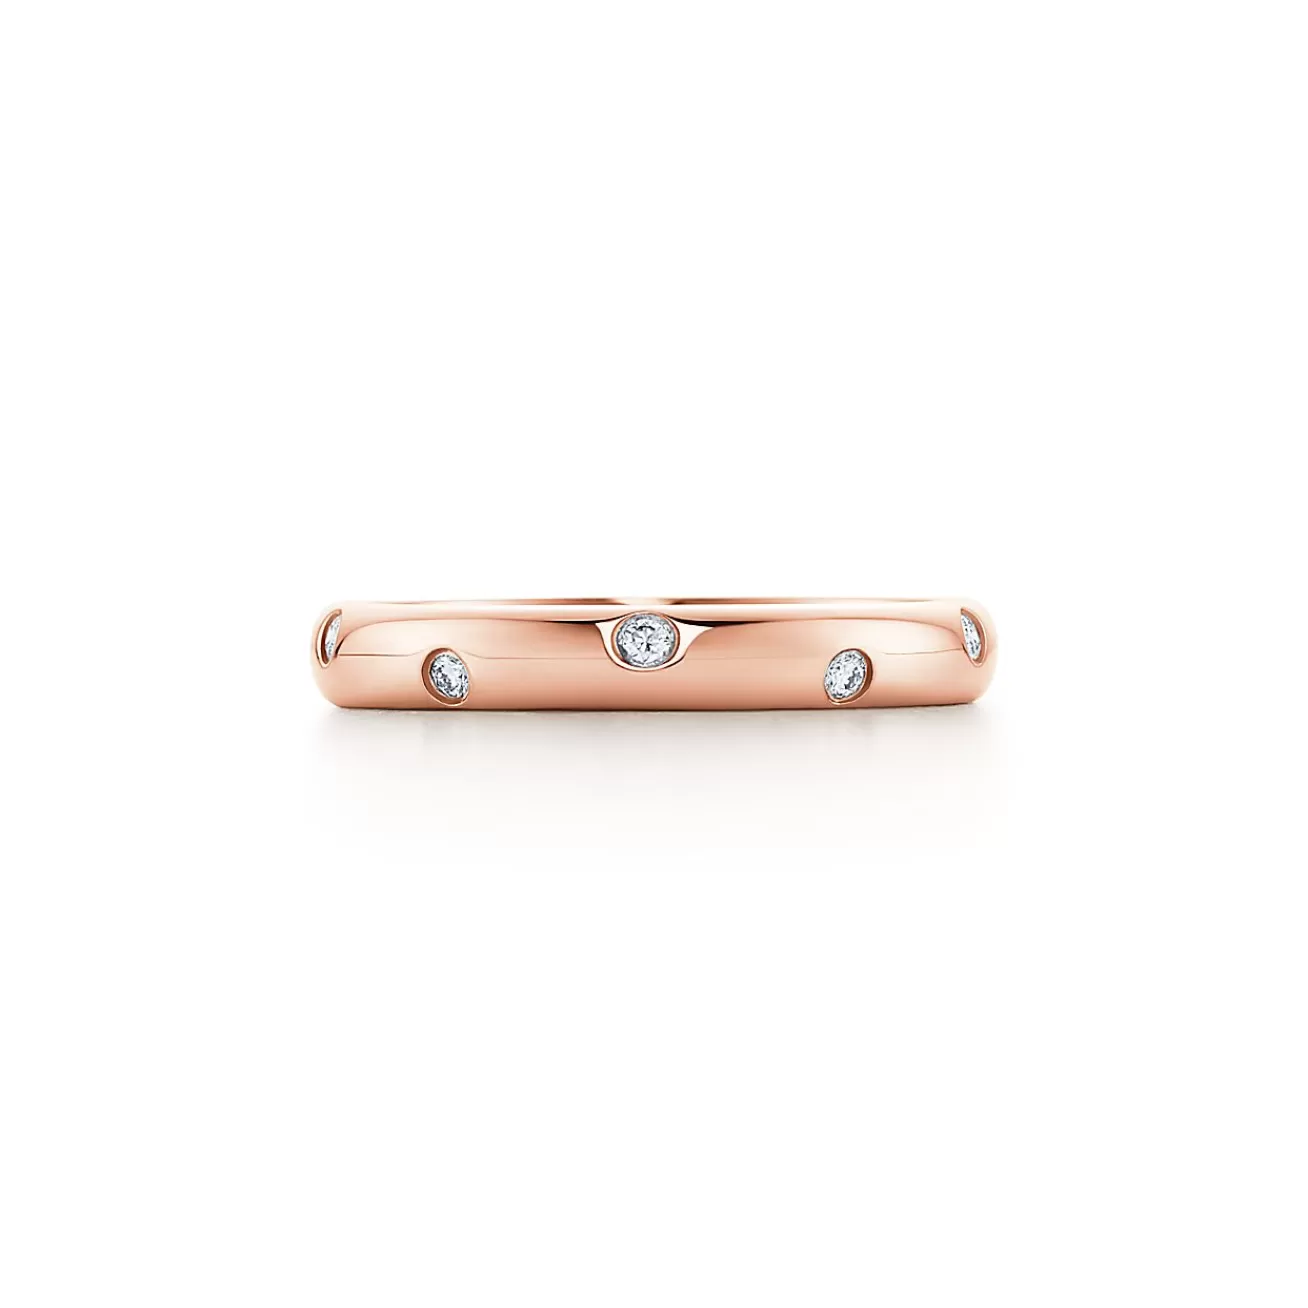 Tiffany & Co. Etoile band ring in 18k rose gold with diamonds, 3 mm wide. | ^Women Rings | Rose Gold Jewelry